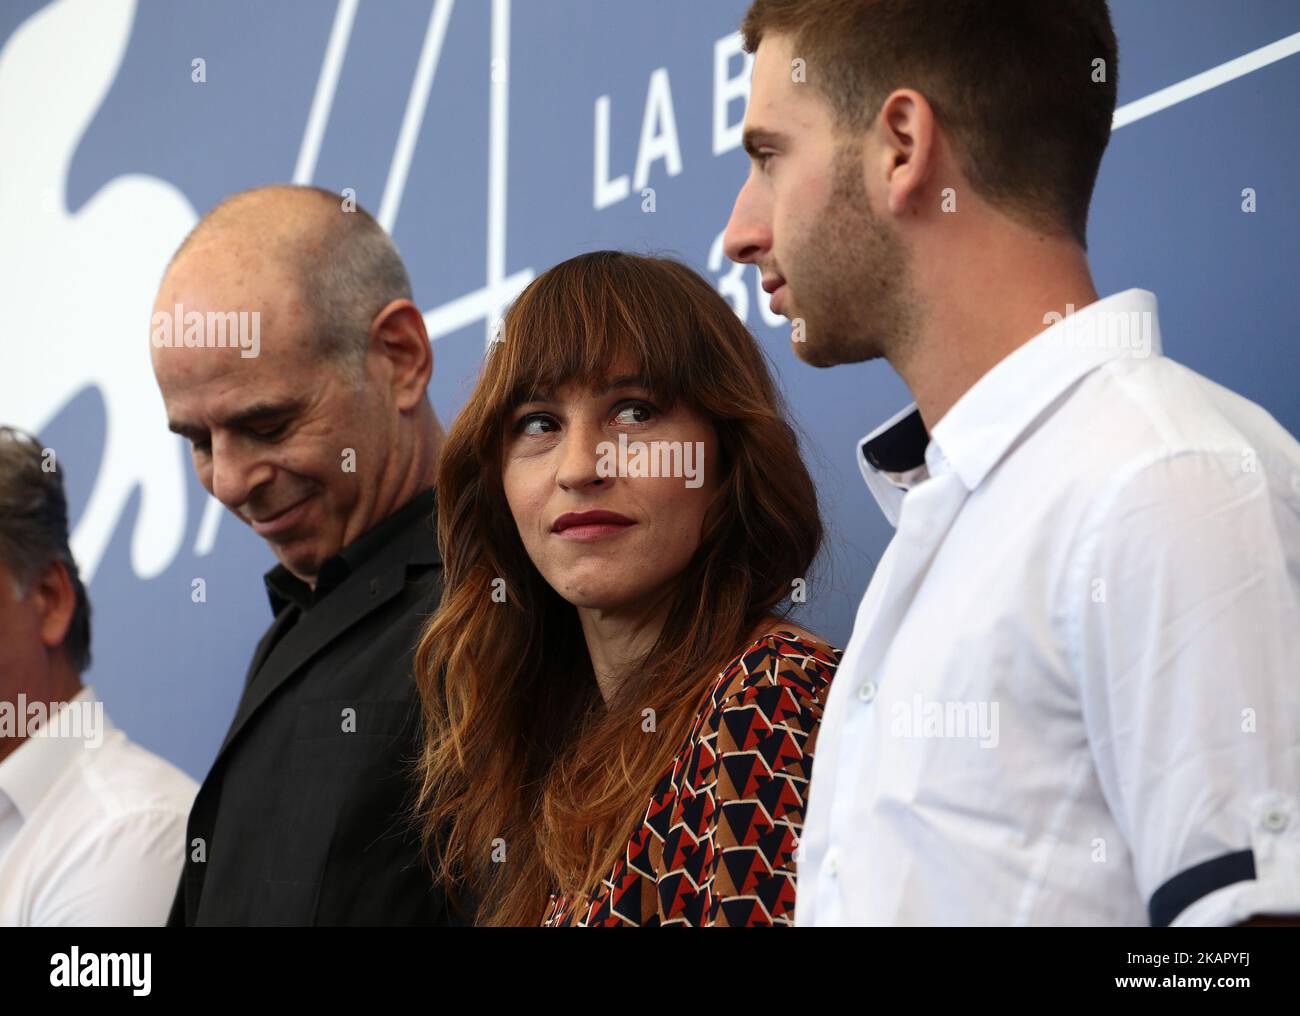 Director Samuel Maoz, actress Sarah Adler and actor Yonathan Shiray attend the photocall of the movie 'Foxtrot' presented in competition at the 74th Venice Film Festival in Venice, Italy, on September 2, 2017. (Photo by Matteo Chinellato/NurPhoto) Stock Photo